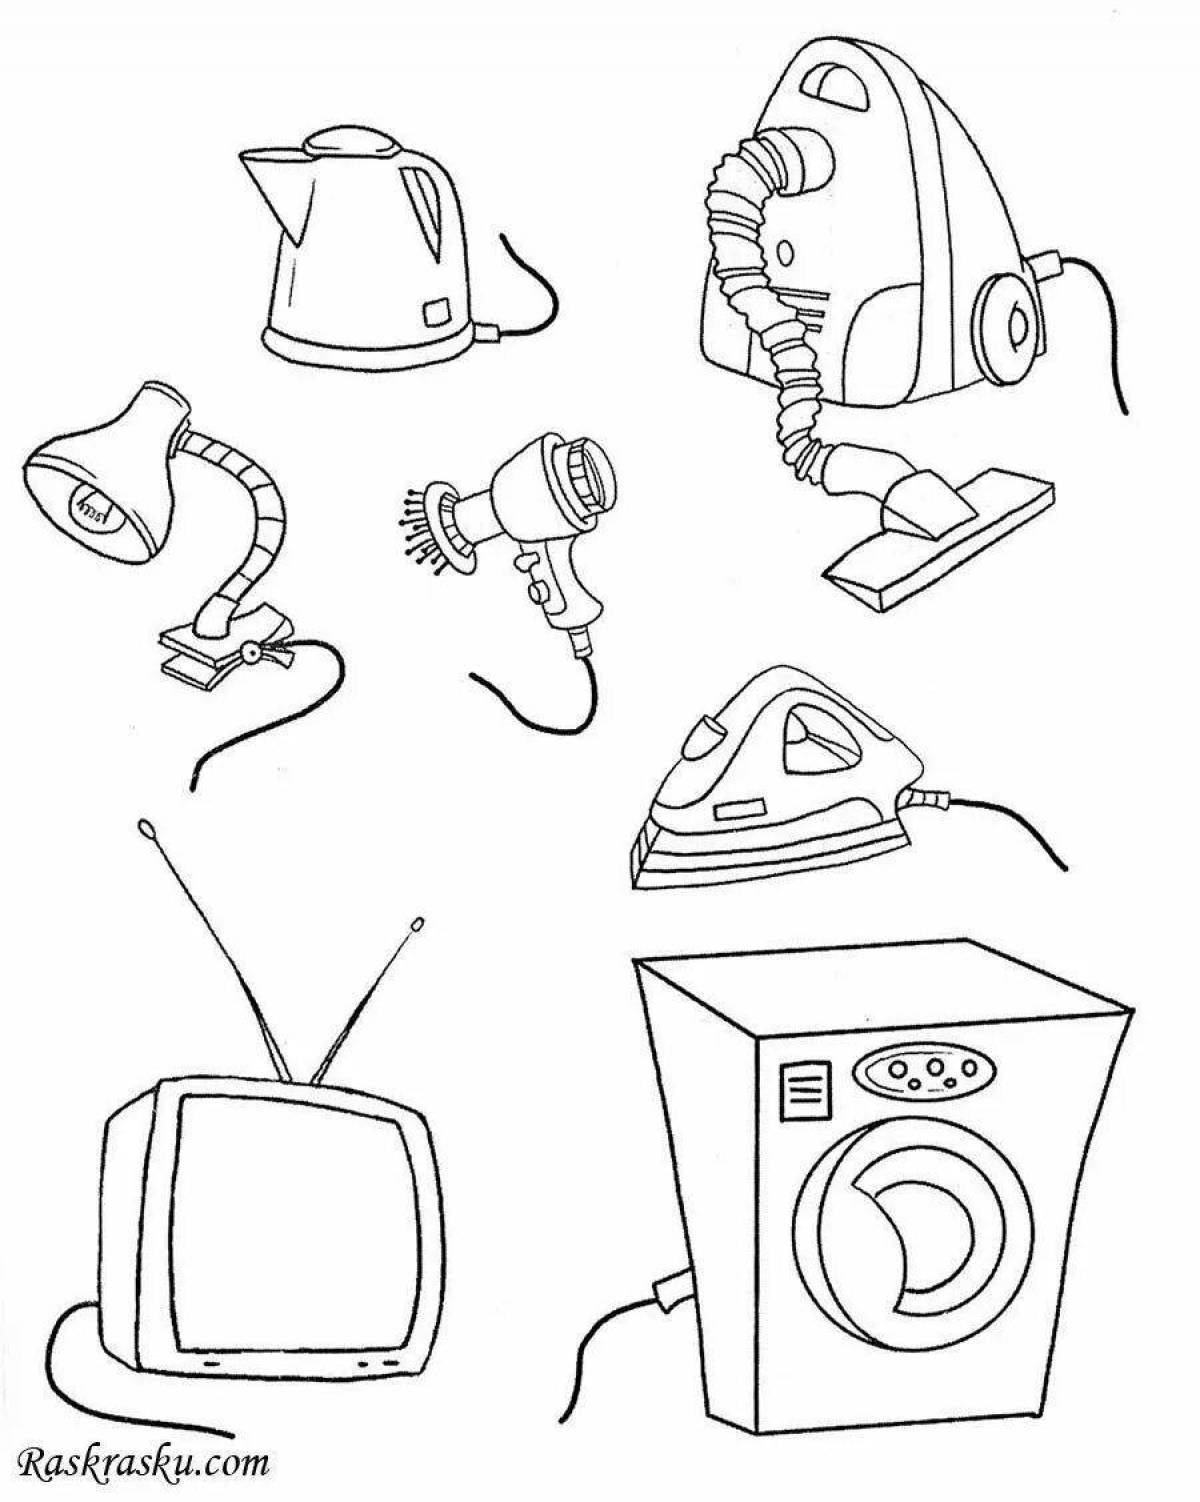 Colorful coloring of household appliances for children 5-6 years old